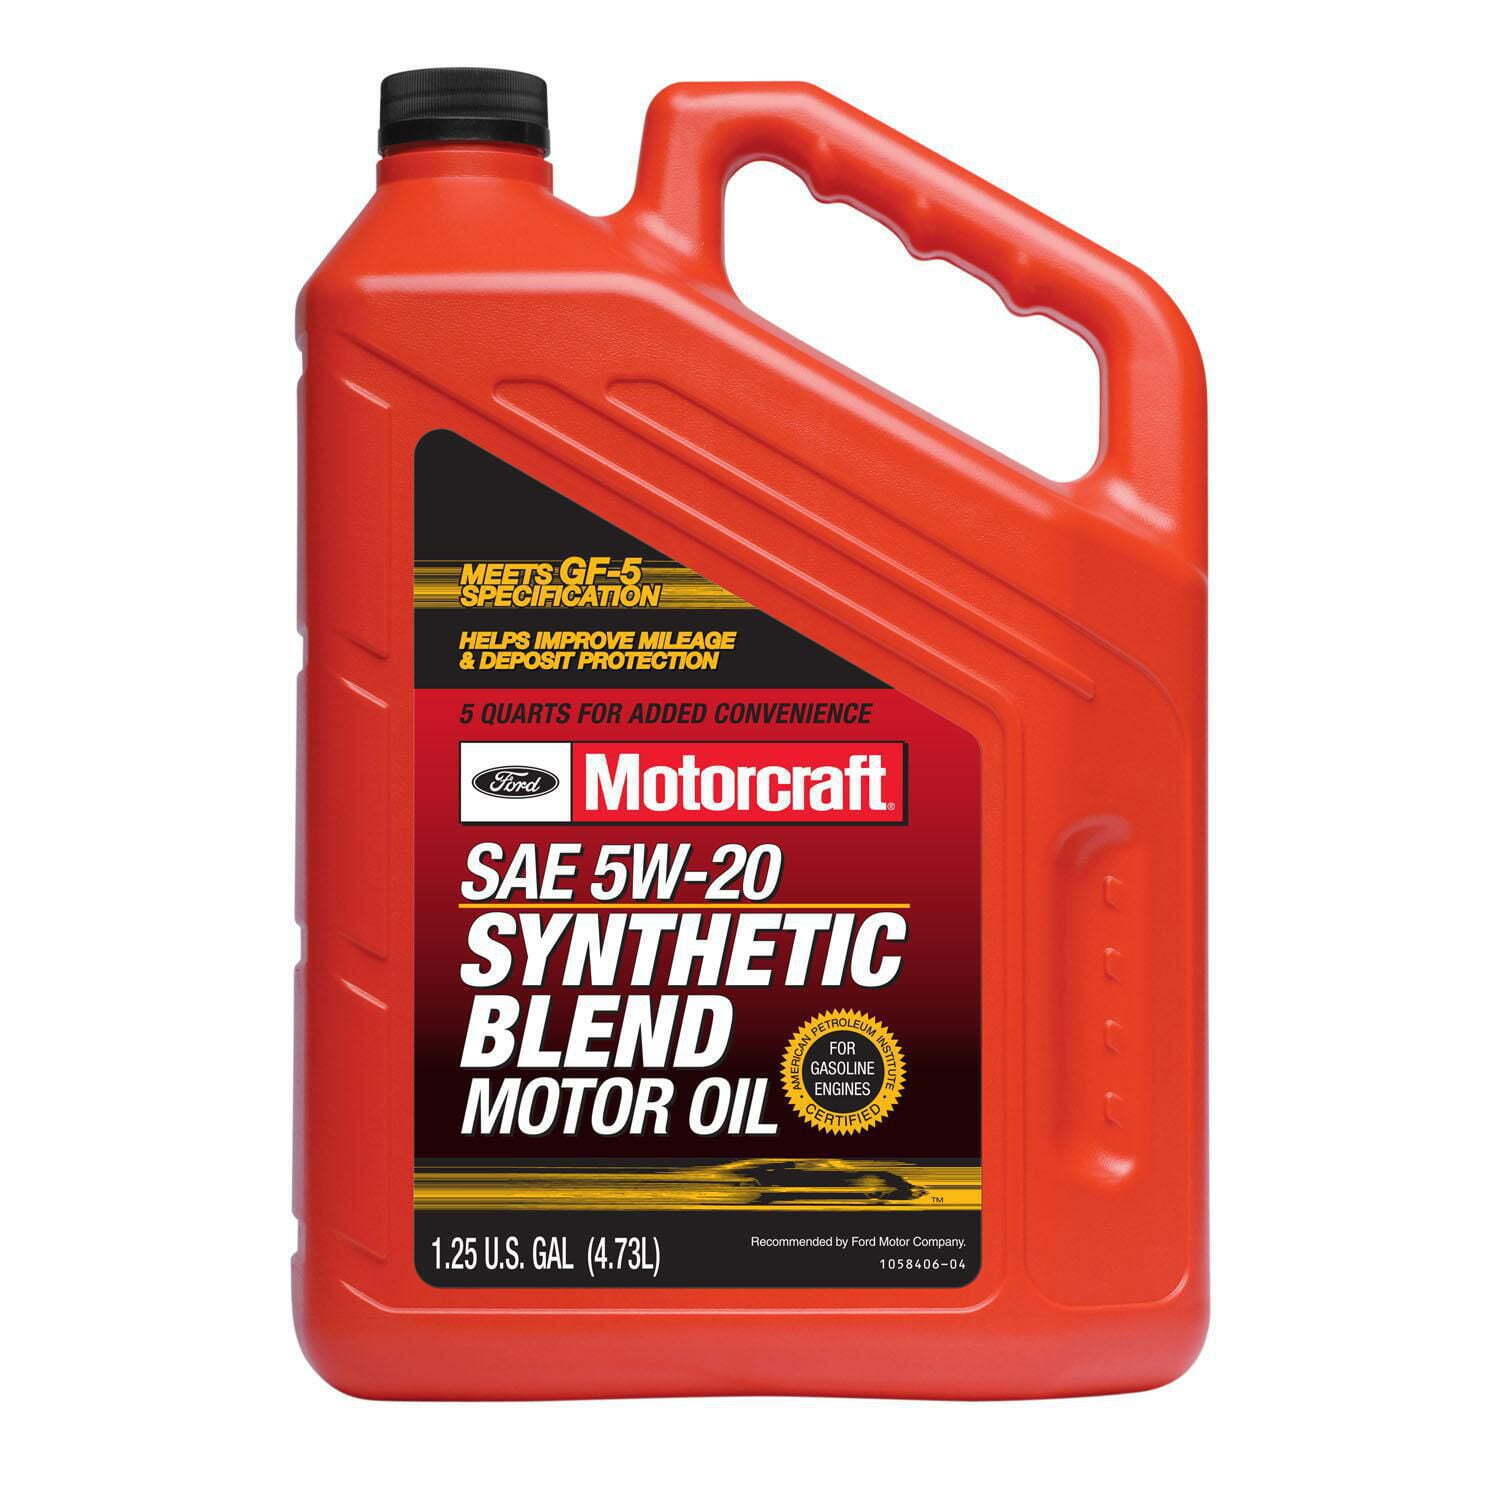 Motorcraft Synthetic Blend Motor Oil, 5W-20 - A premium-quality motor oil specif